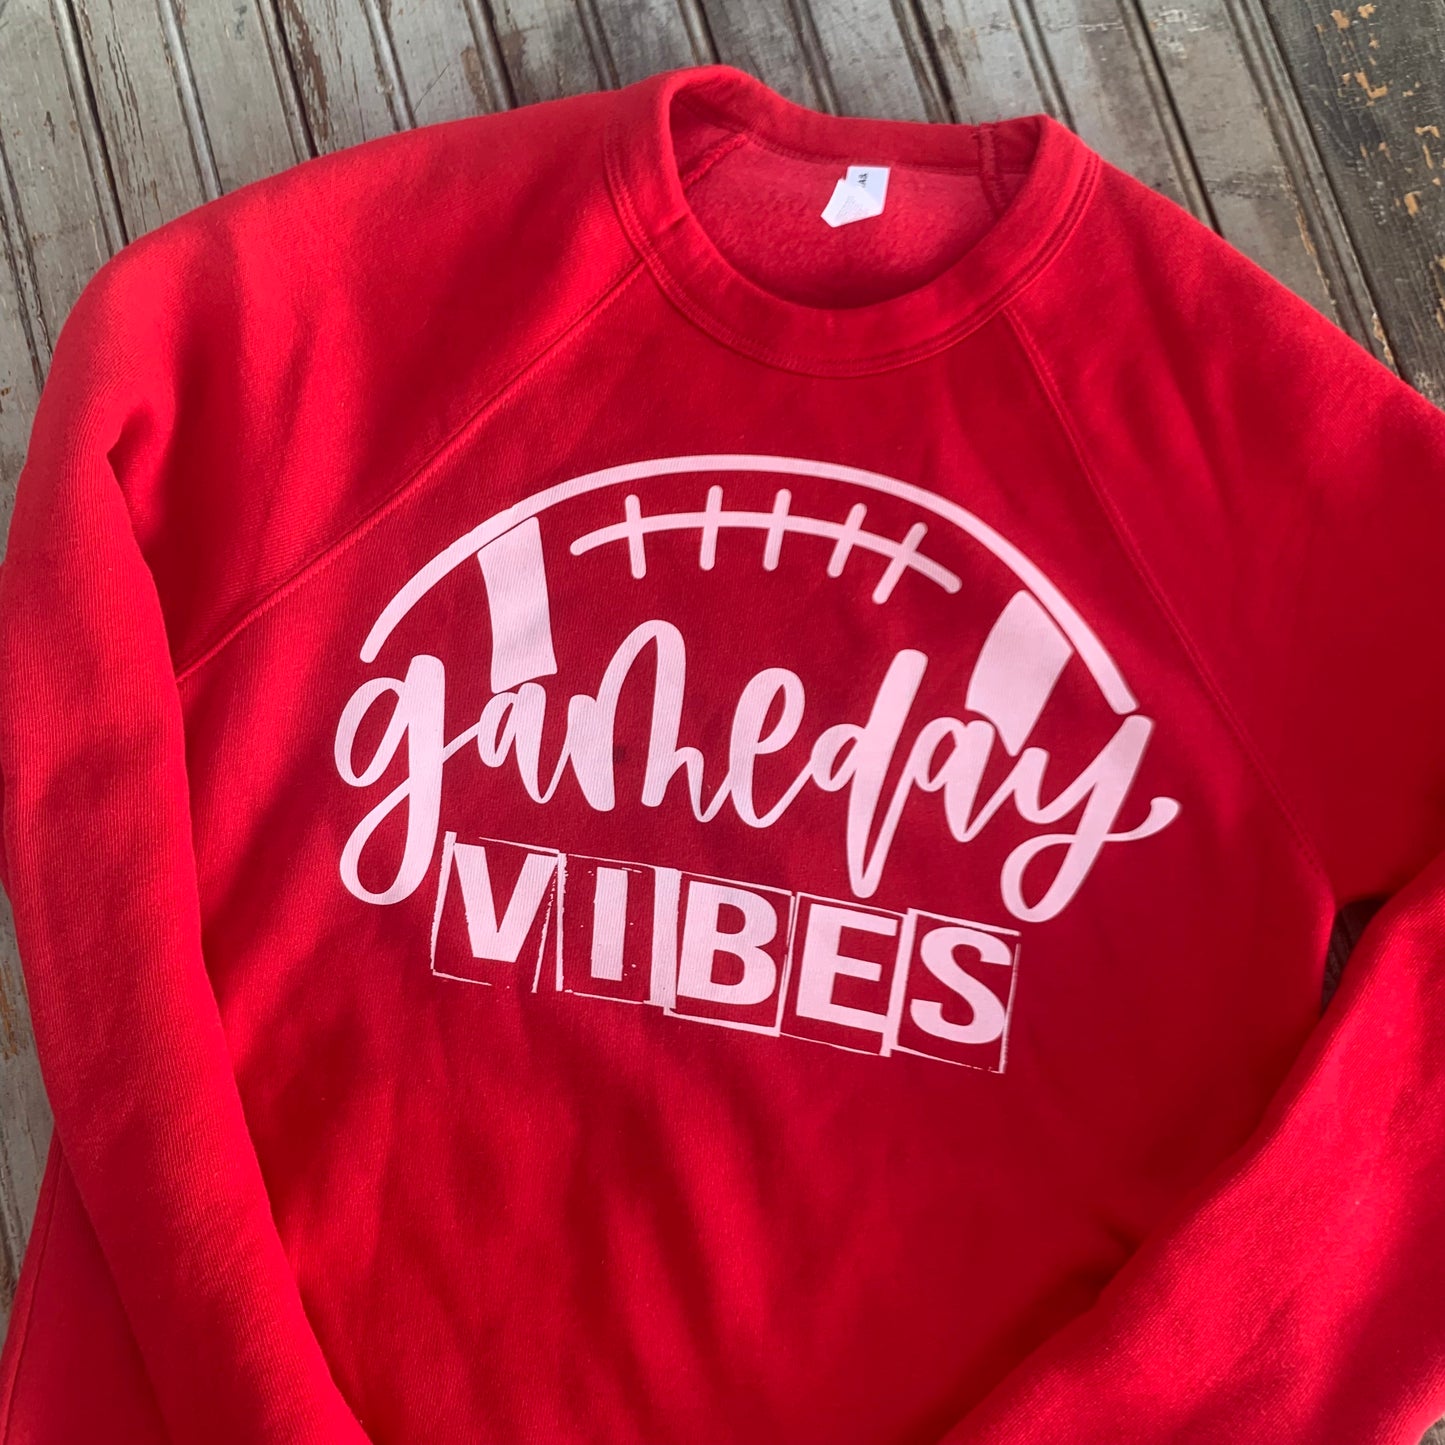 Game Day Vibes - PREORDER - Due Tuesday, September 28th